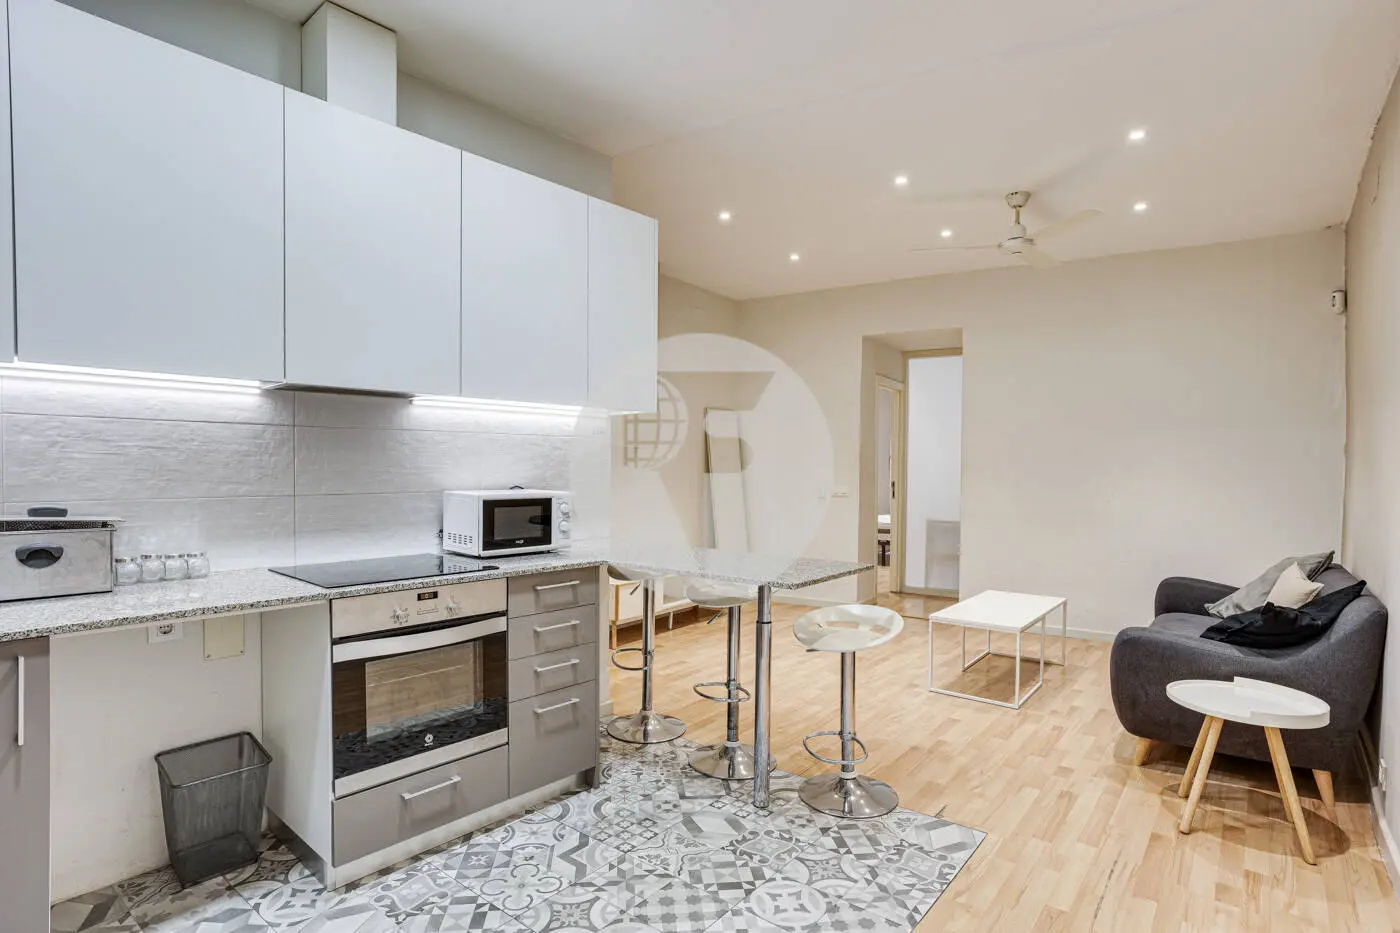 Magnificent apartment for sale next to Pl Universitat of 114m2 according to the land registry, located on Tallers Street in the Ciutat Vella neighborhood of Barcelona